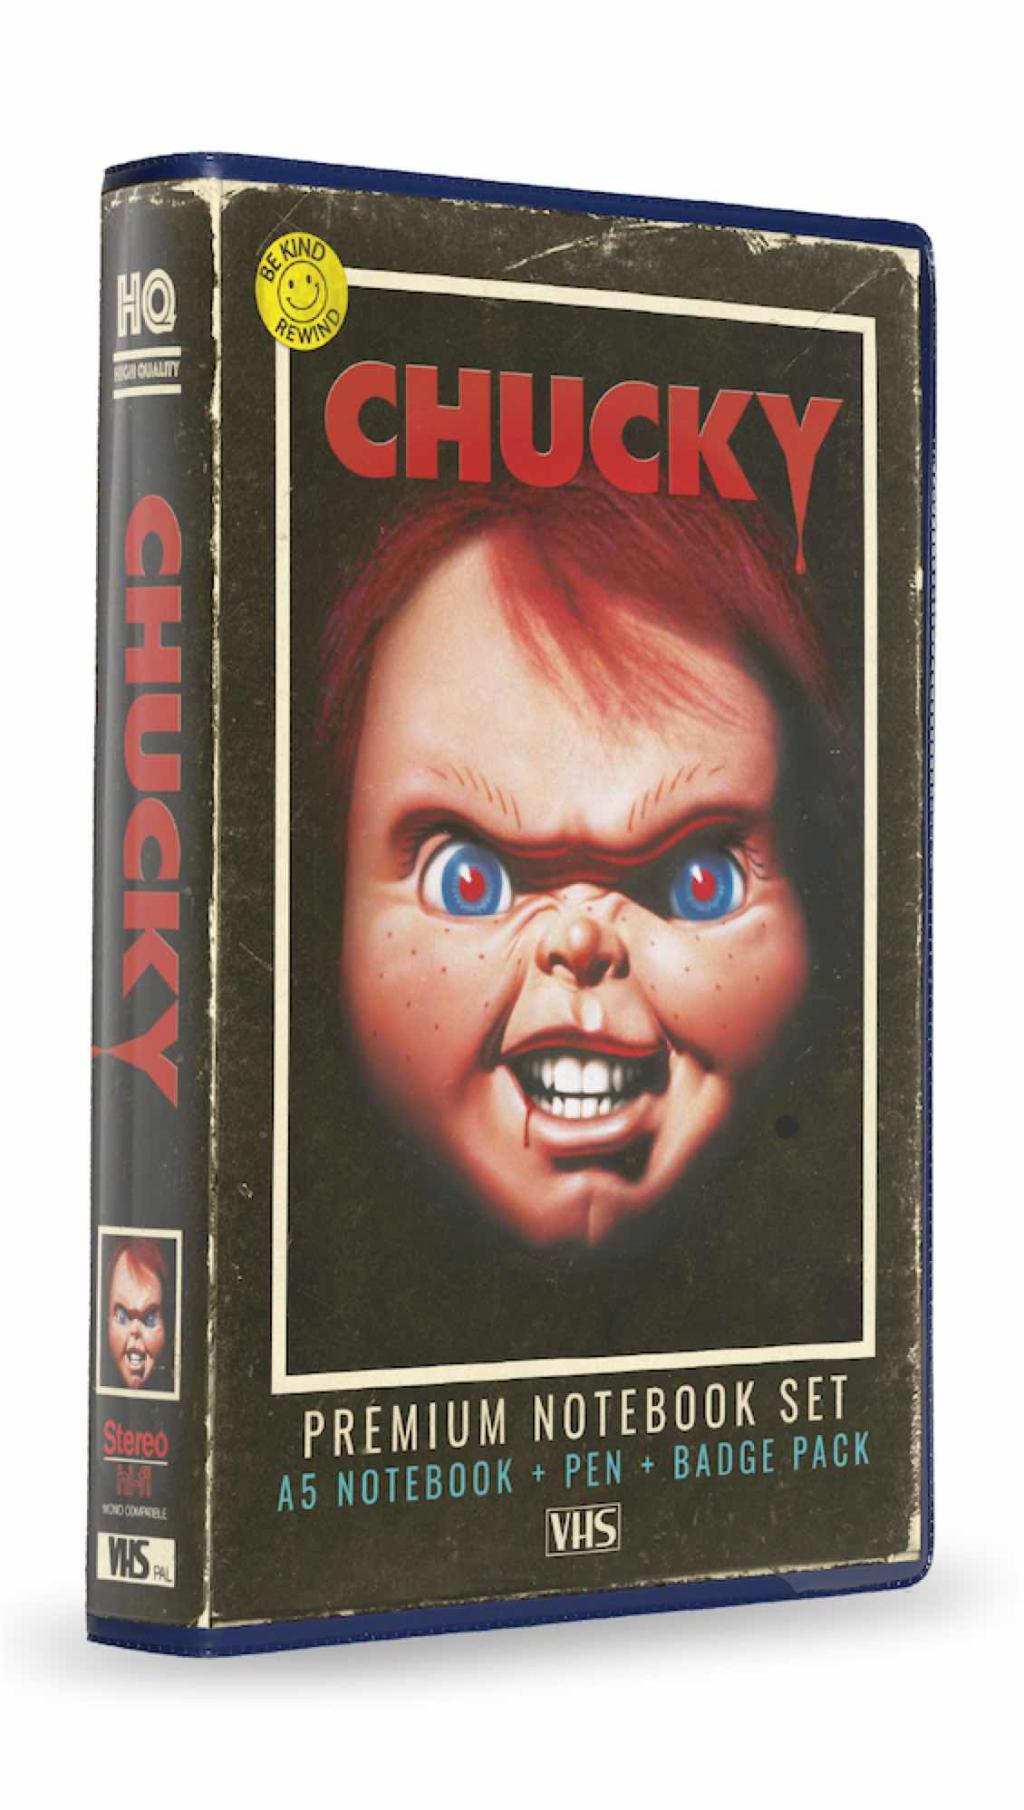 CHUCKY - Set VHS - Stationery Set (Notebook, Badges and Pen)